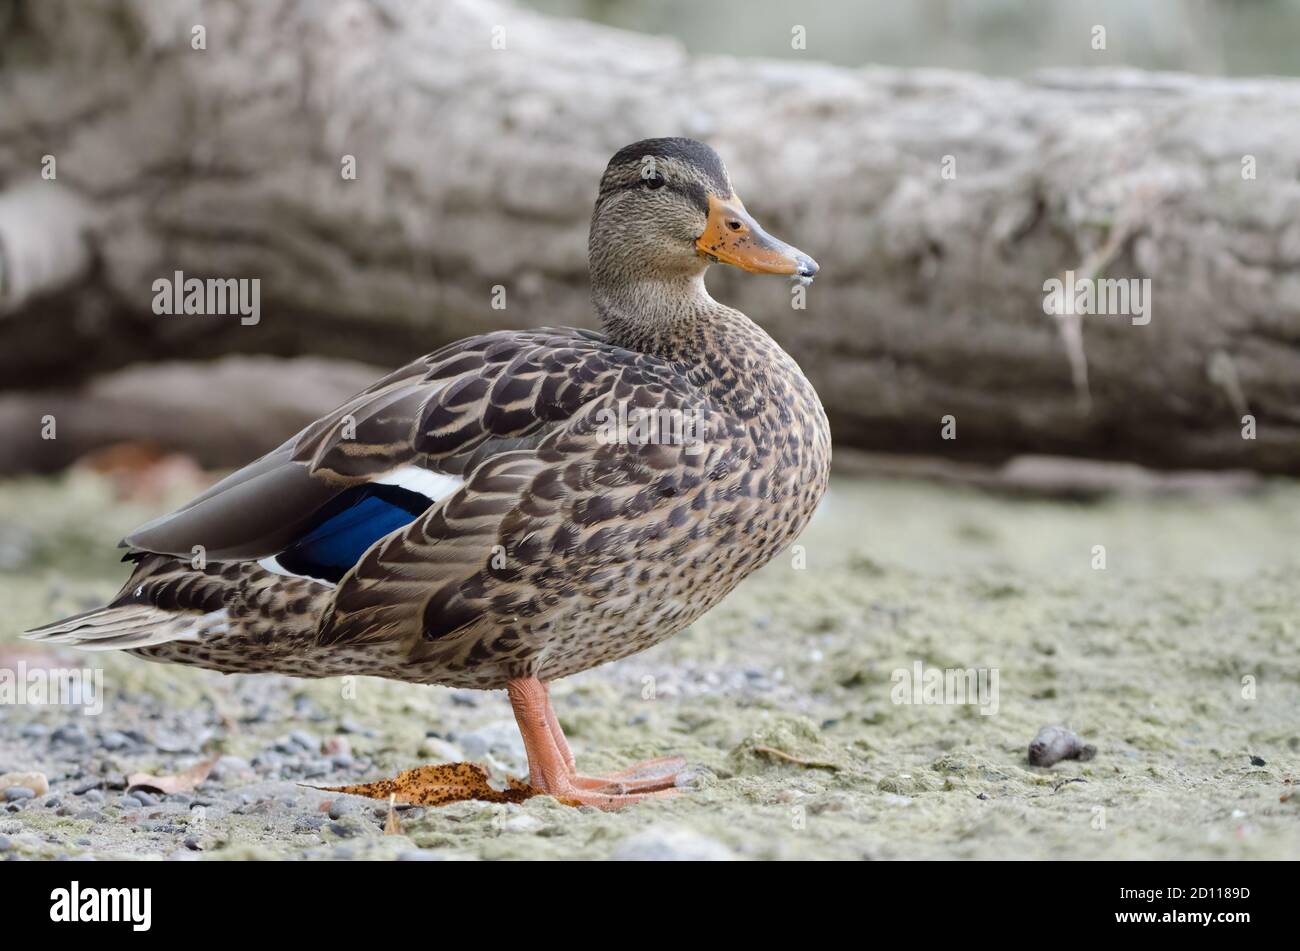 A female Mallard (Anas platyrhynchos). The mallard species is a main ancestor of many breeds of domesticated ducks. They are highly social birds and r Stock Photo